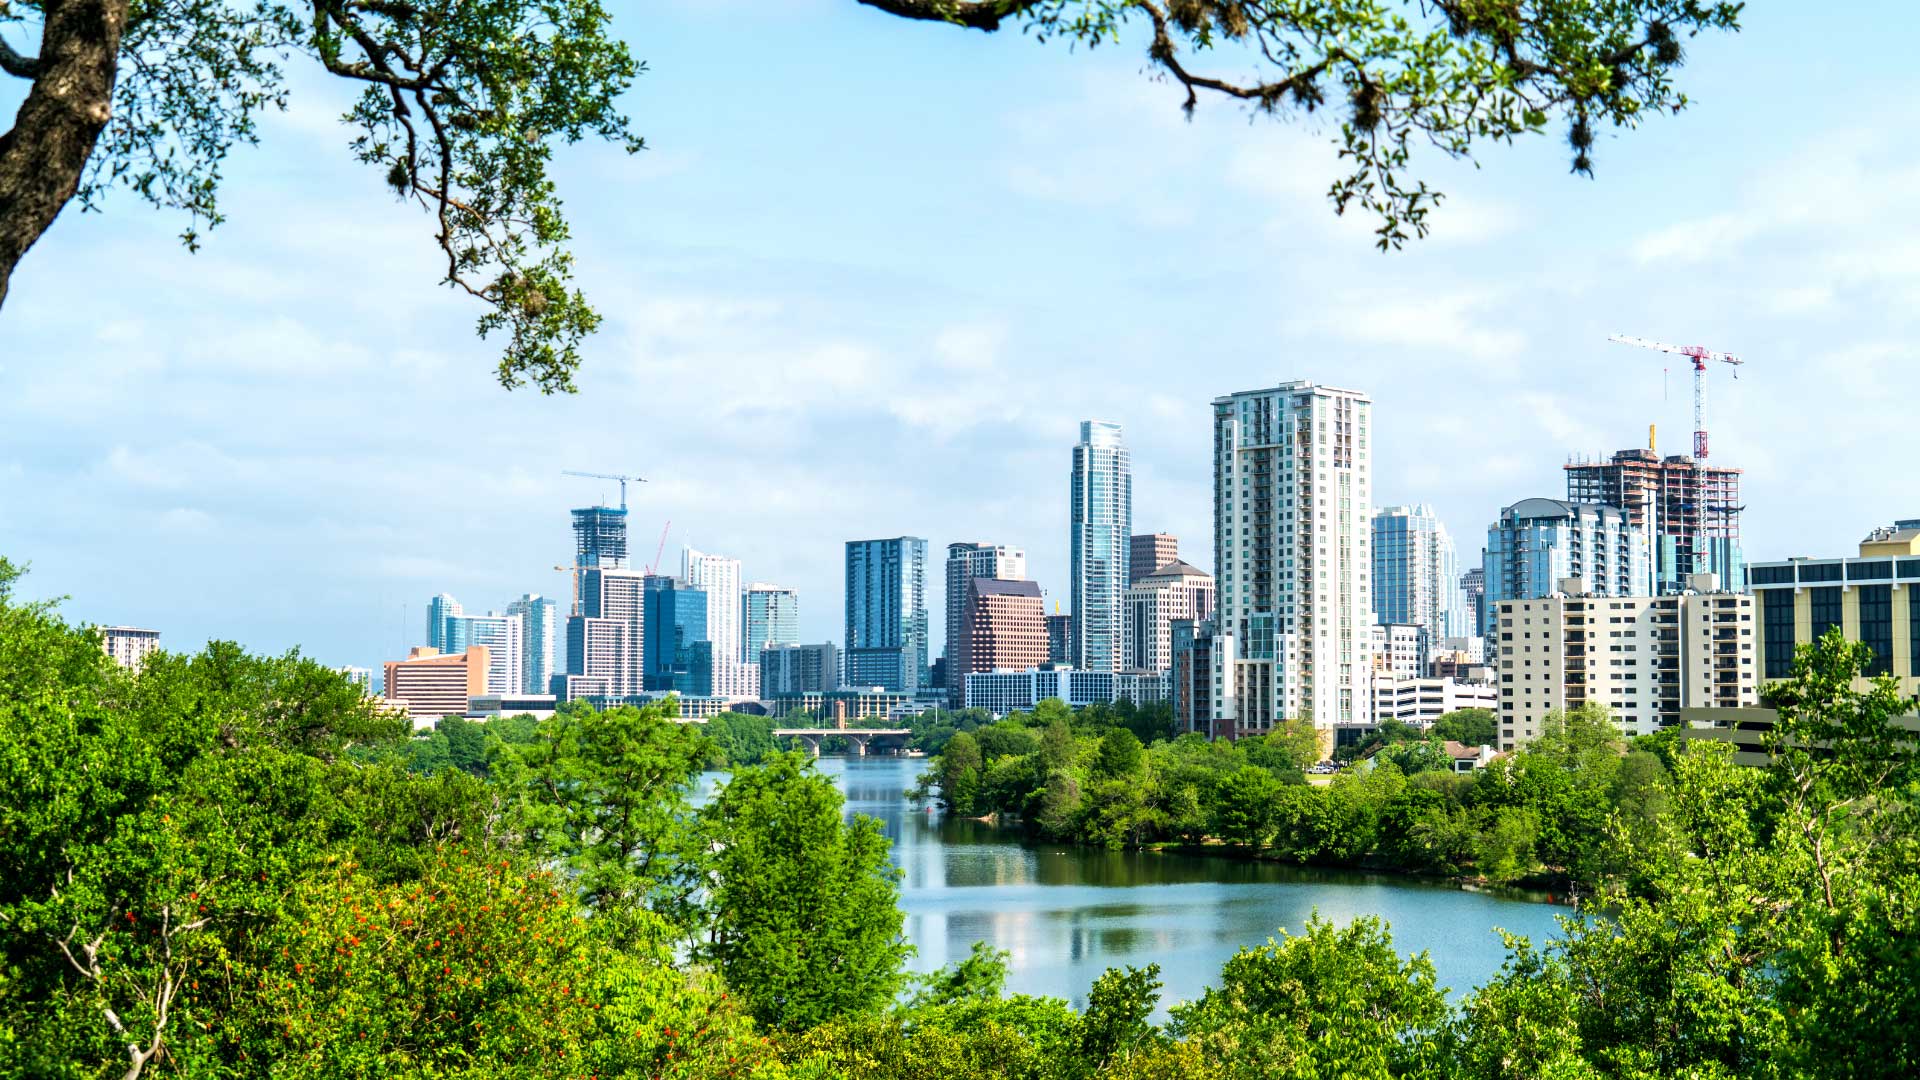 Living in Austin: Things to Know, Places to Live, & More